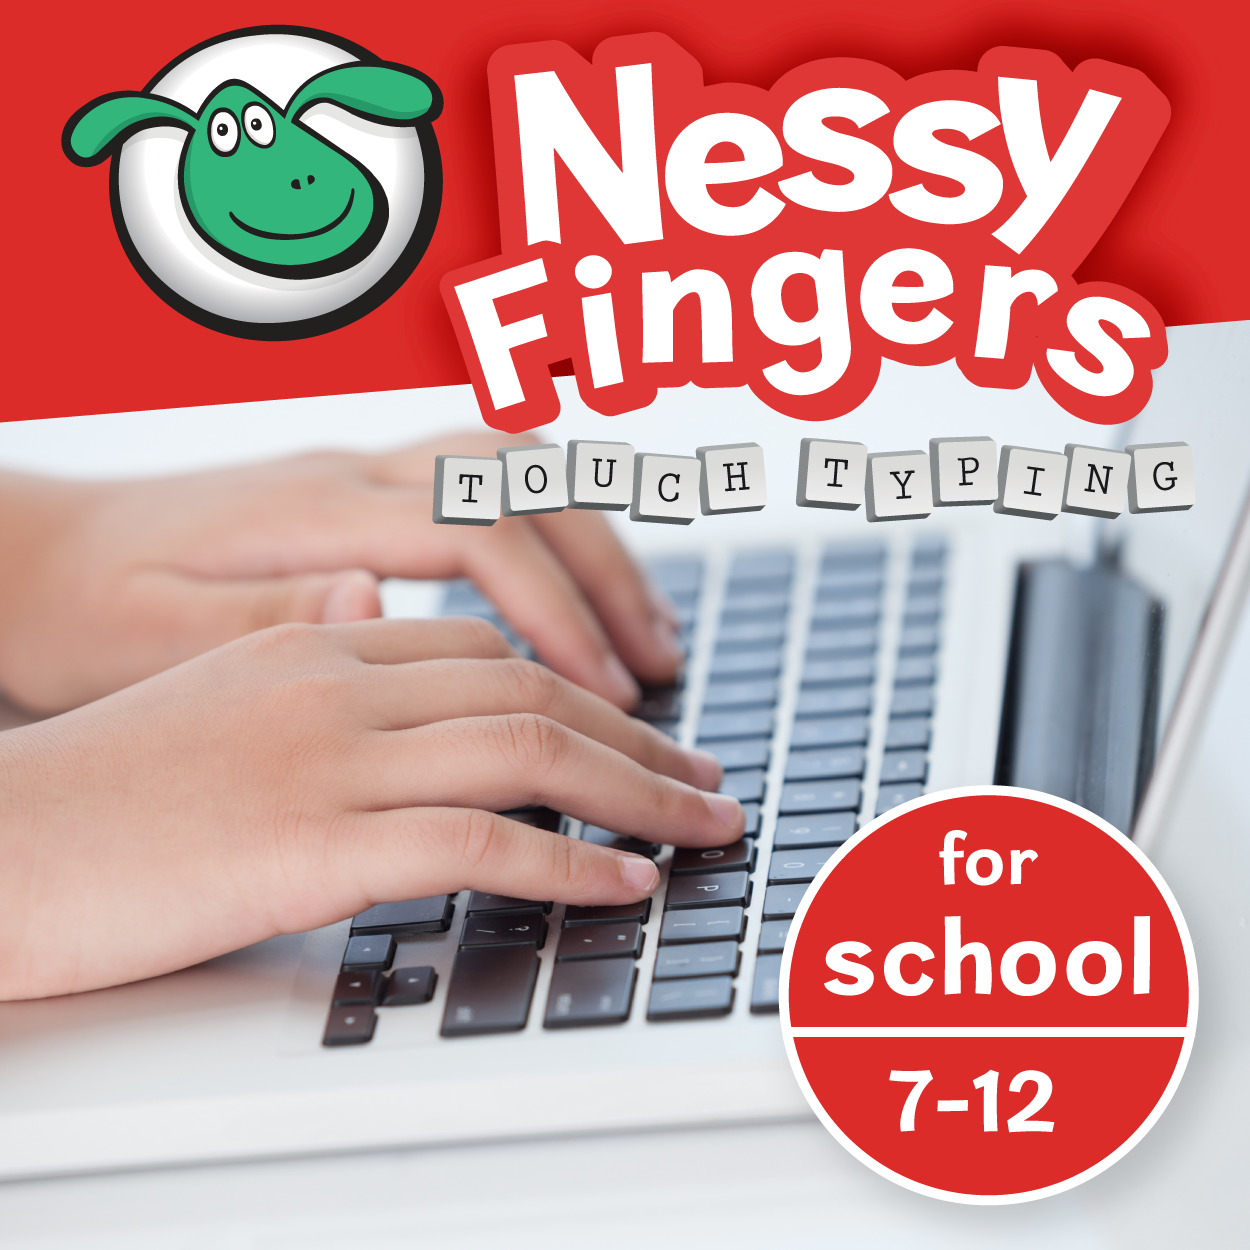 Nessy Fingers for schools